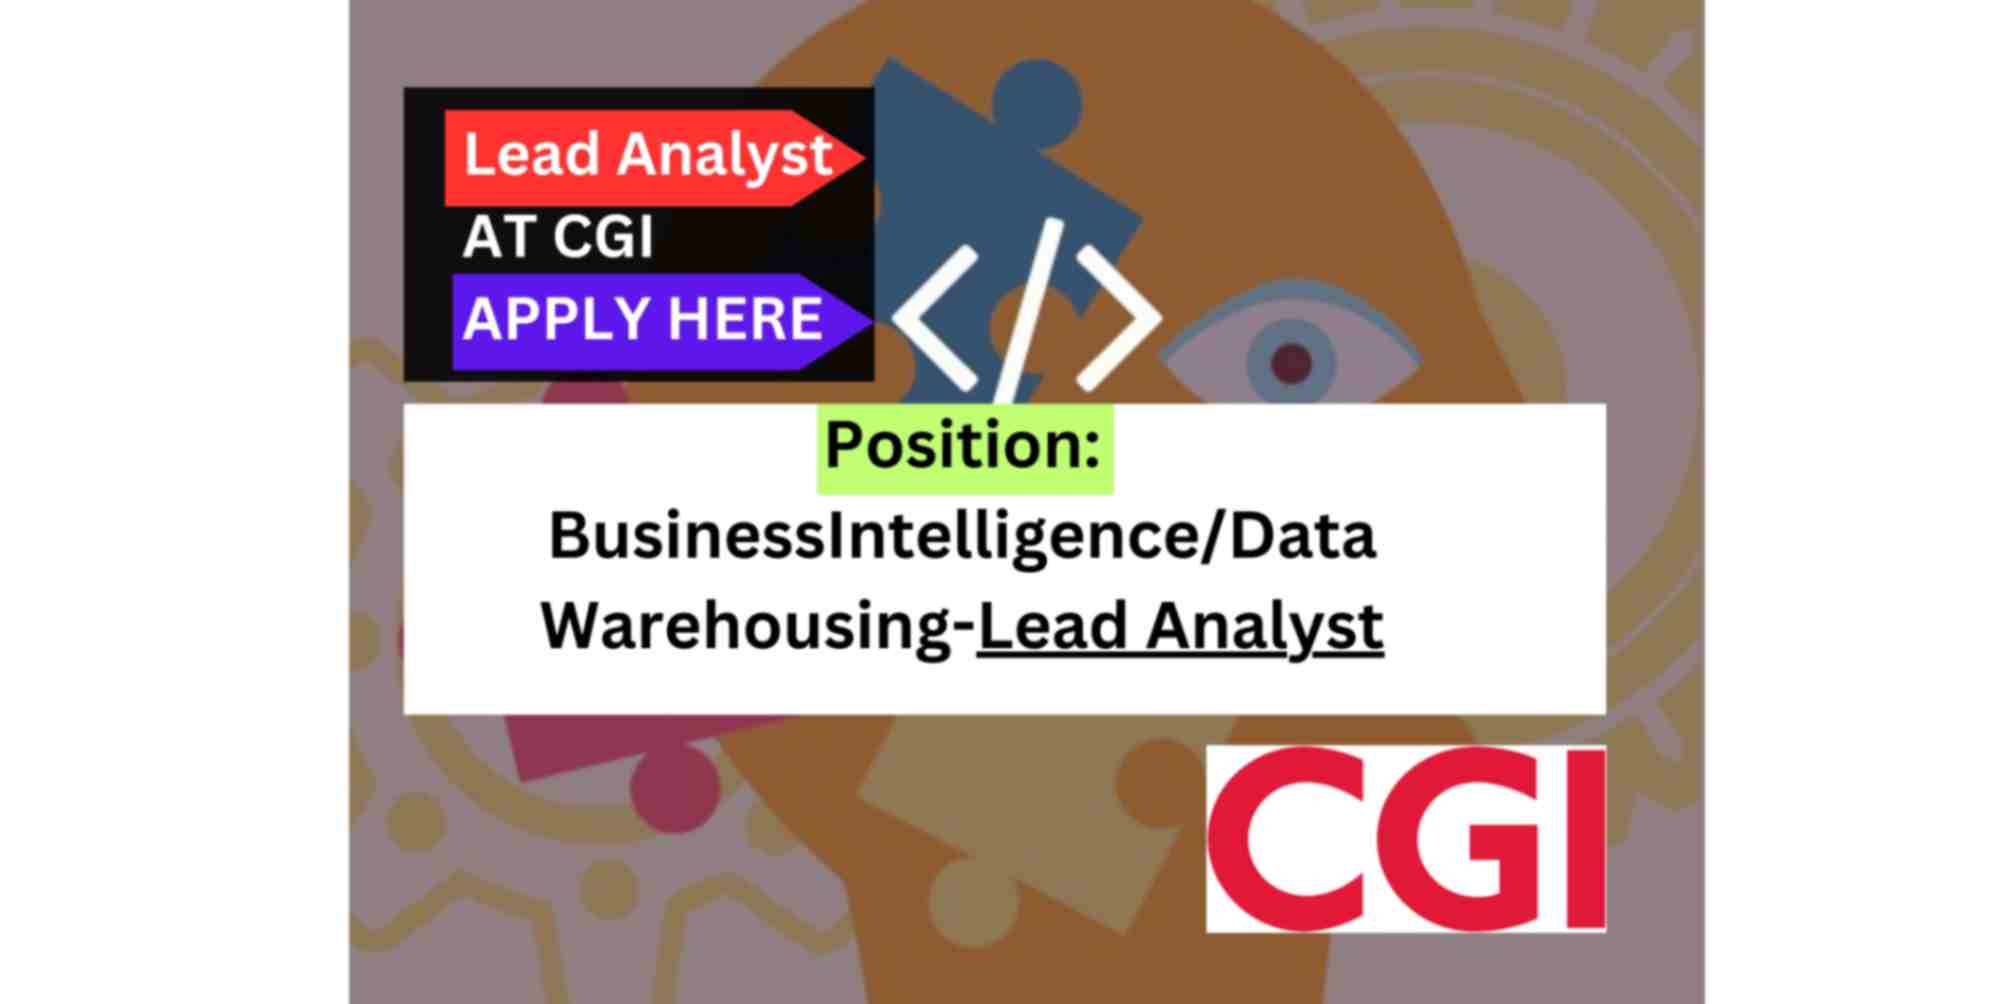 Lead analyst